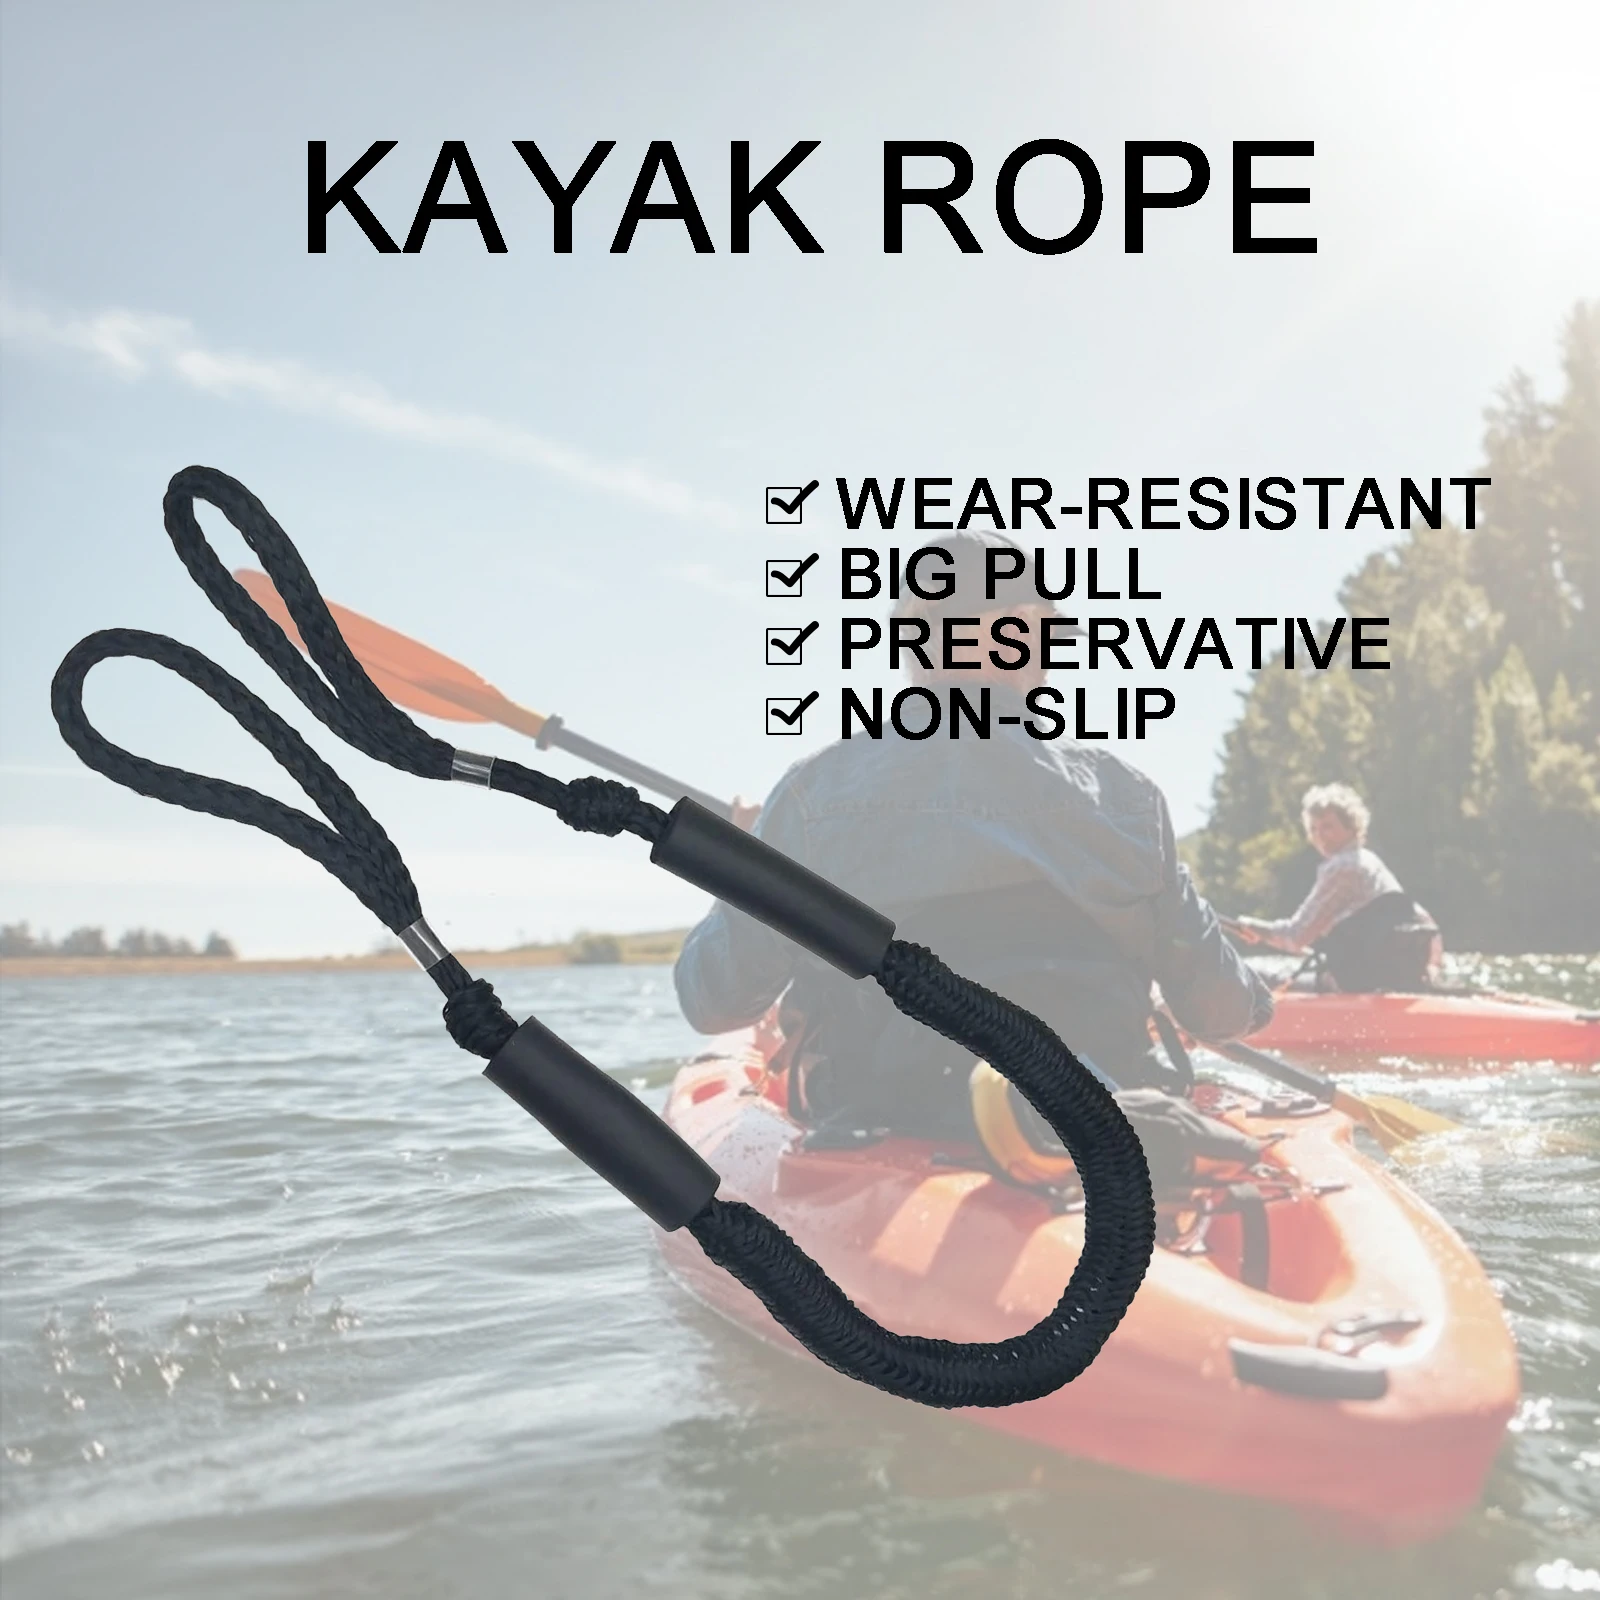 

Boat Dock Line Mooring Sailing Rope Bungee Cords Boats Boating For Boat Anchor Accessories For Ski Sea Wave Runner Kayak Pontoon